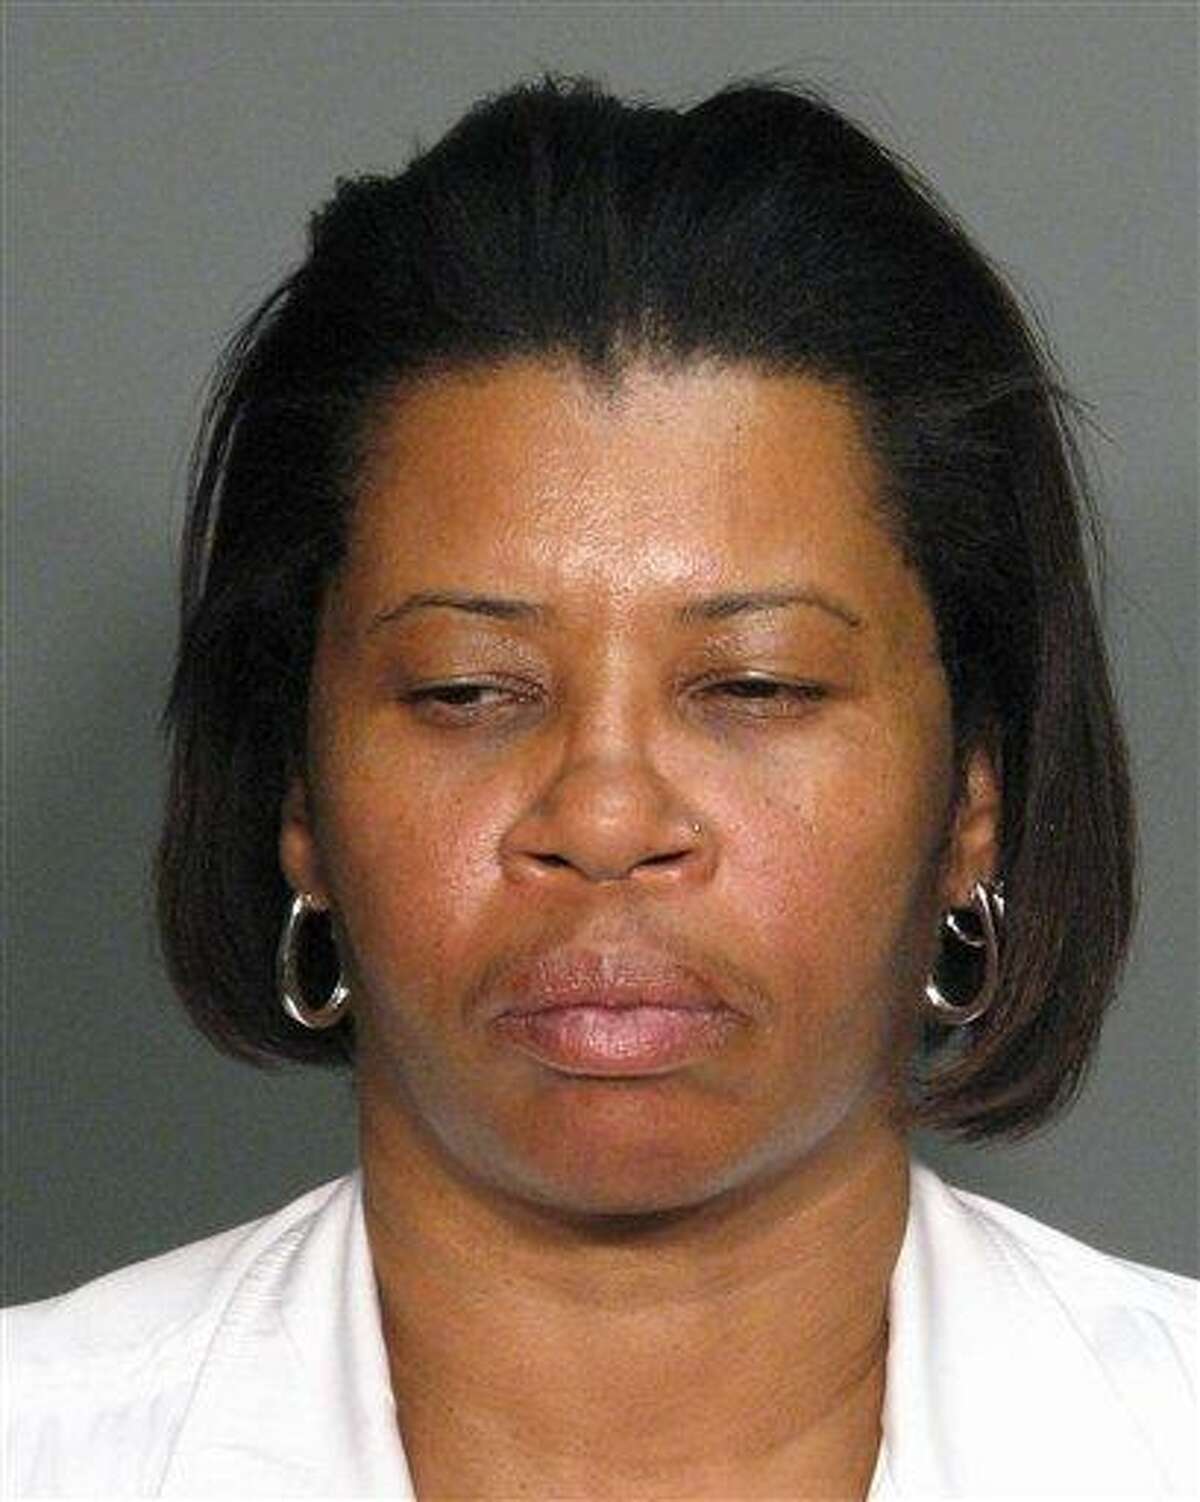 This 2010 file photo provided by the Wake County (N.C.) Bureau of Identification shows Ann Pettway. Pettway, who snatched a newborn baby from a New York hospital more than two decades ago and raised her as her own, faces sentencing in Manhattan federal court on Monday. Associated Press